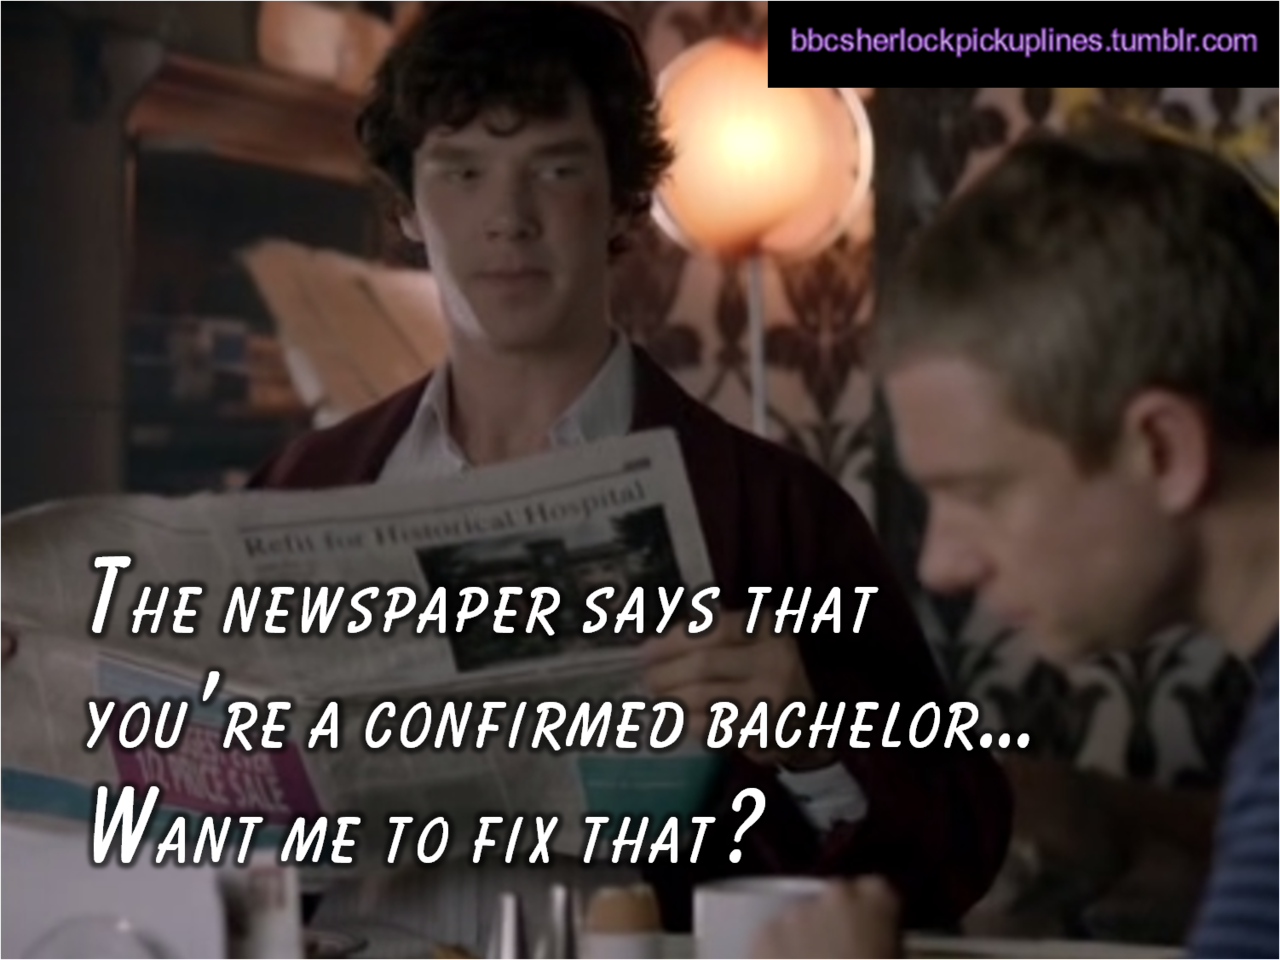 &ldquo;The newspaper says that you&rsquo;re a confirmed bachelor&hellip;